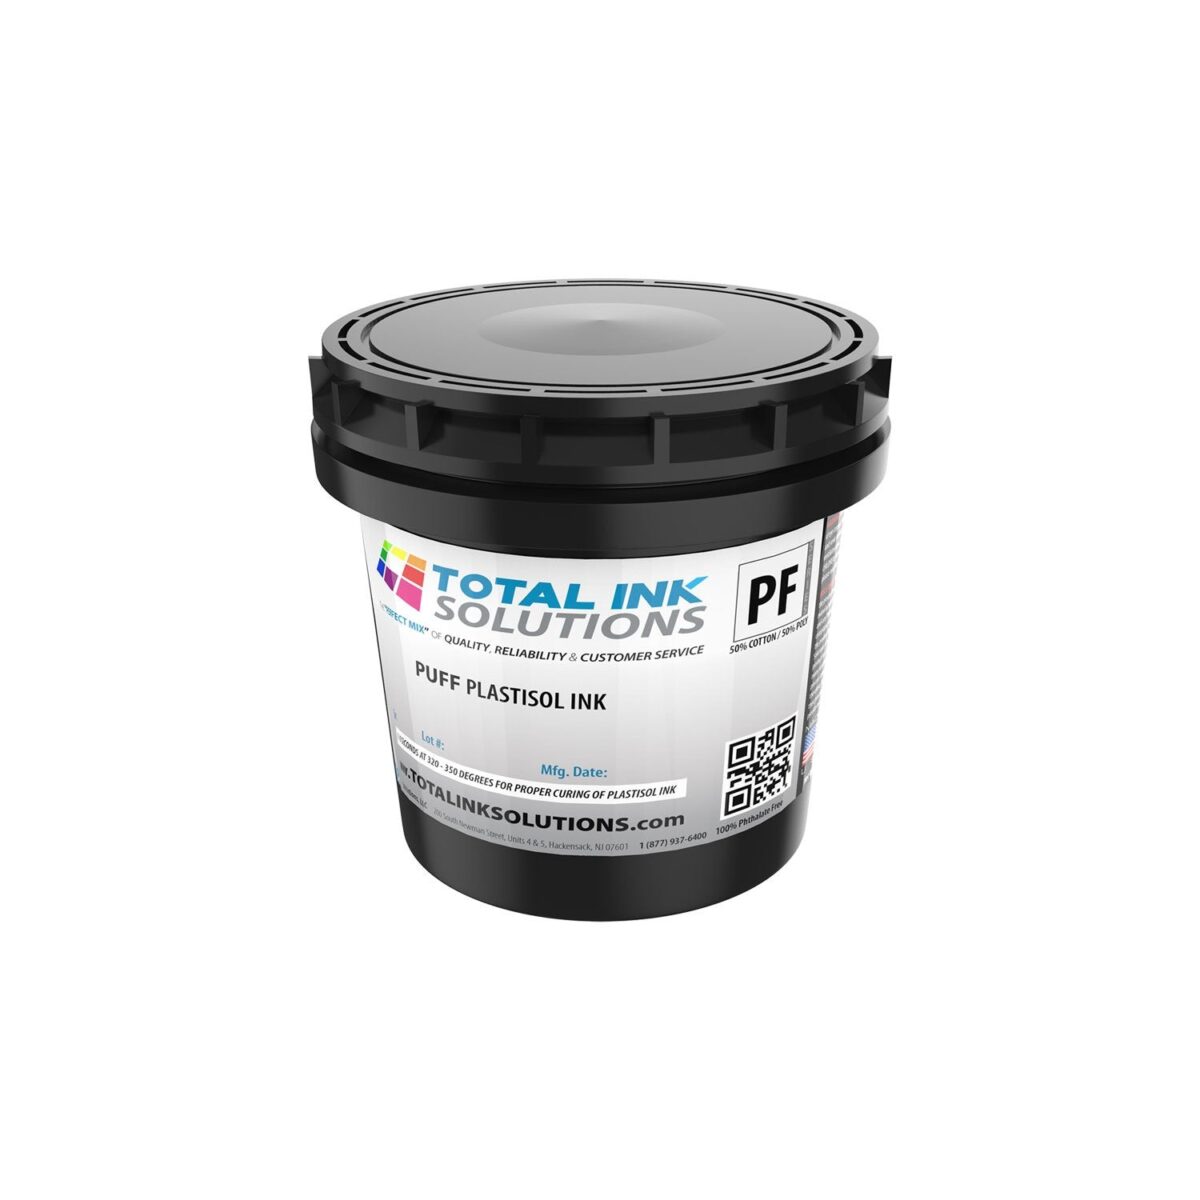 Puff Plastisol Ink - Pint TOTAL INK SOLUTIONS®